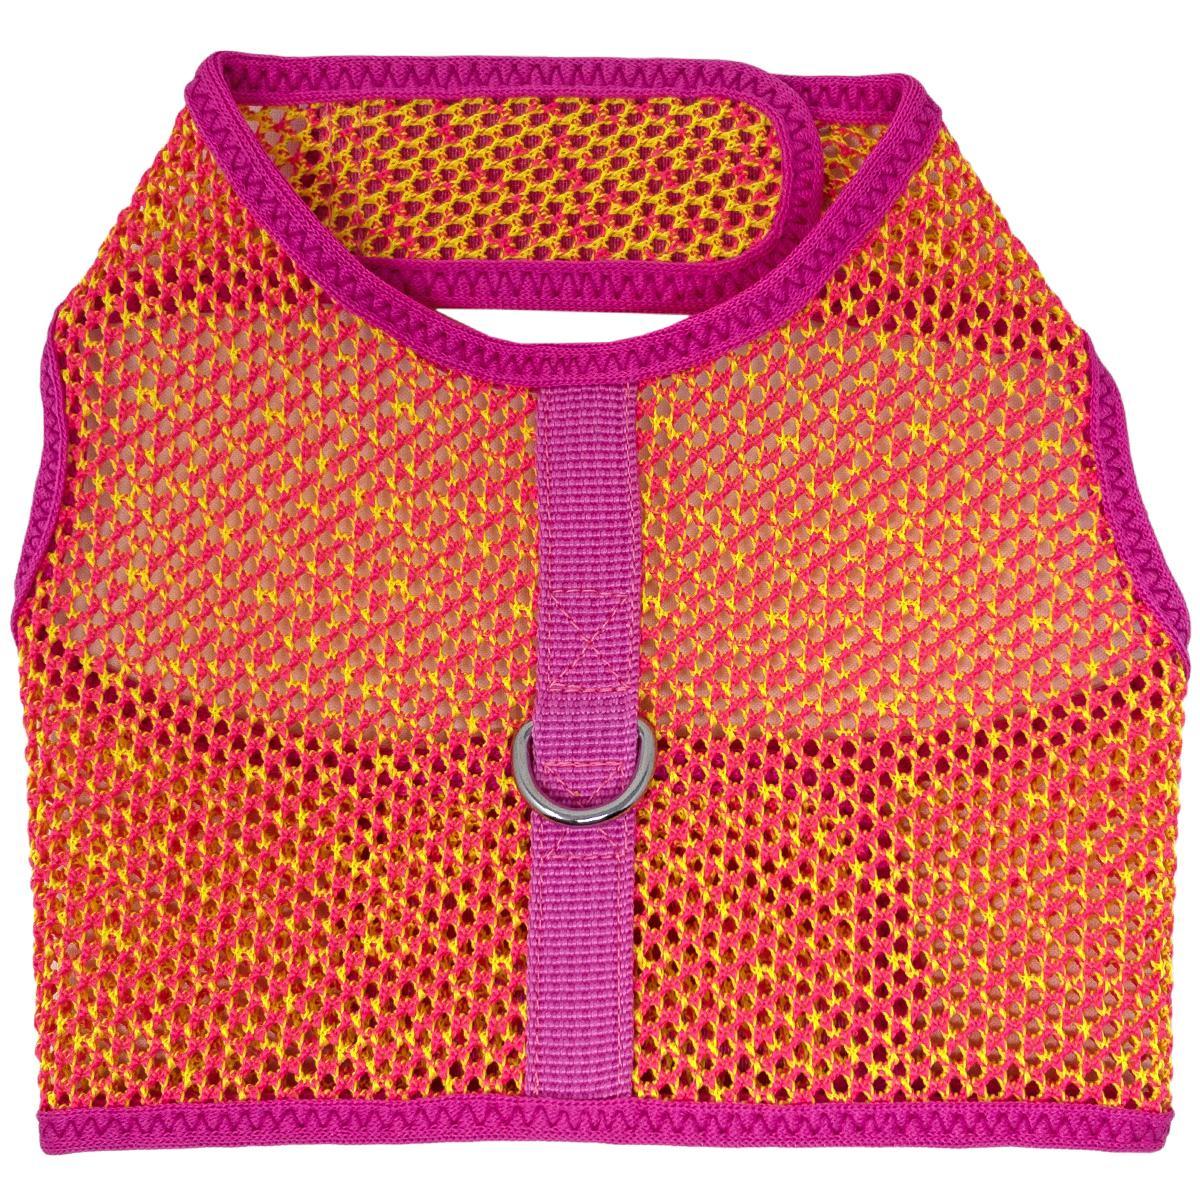 Doggie Design Active Mesh Dog Harness with Leash - Pink & Yellow